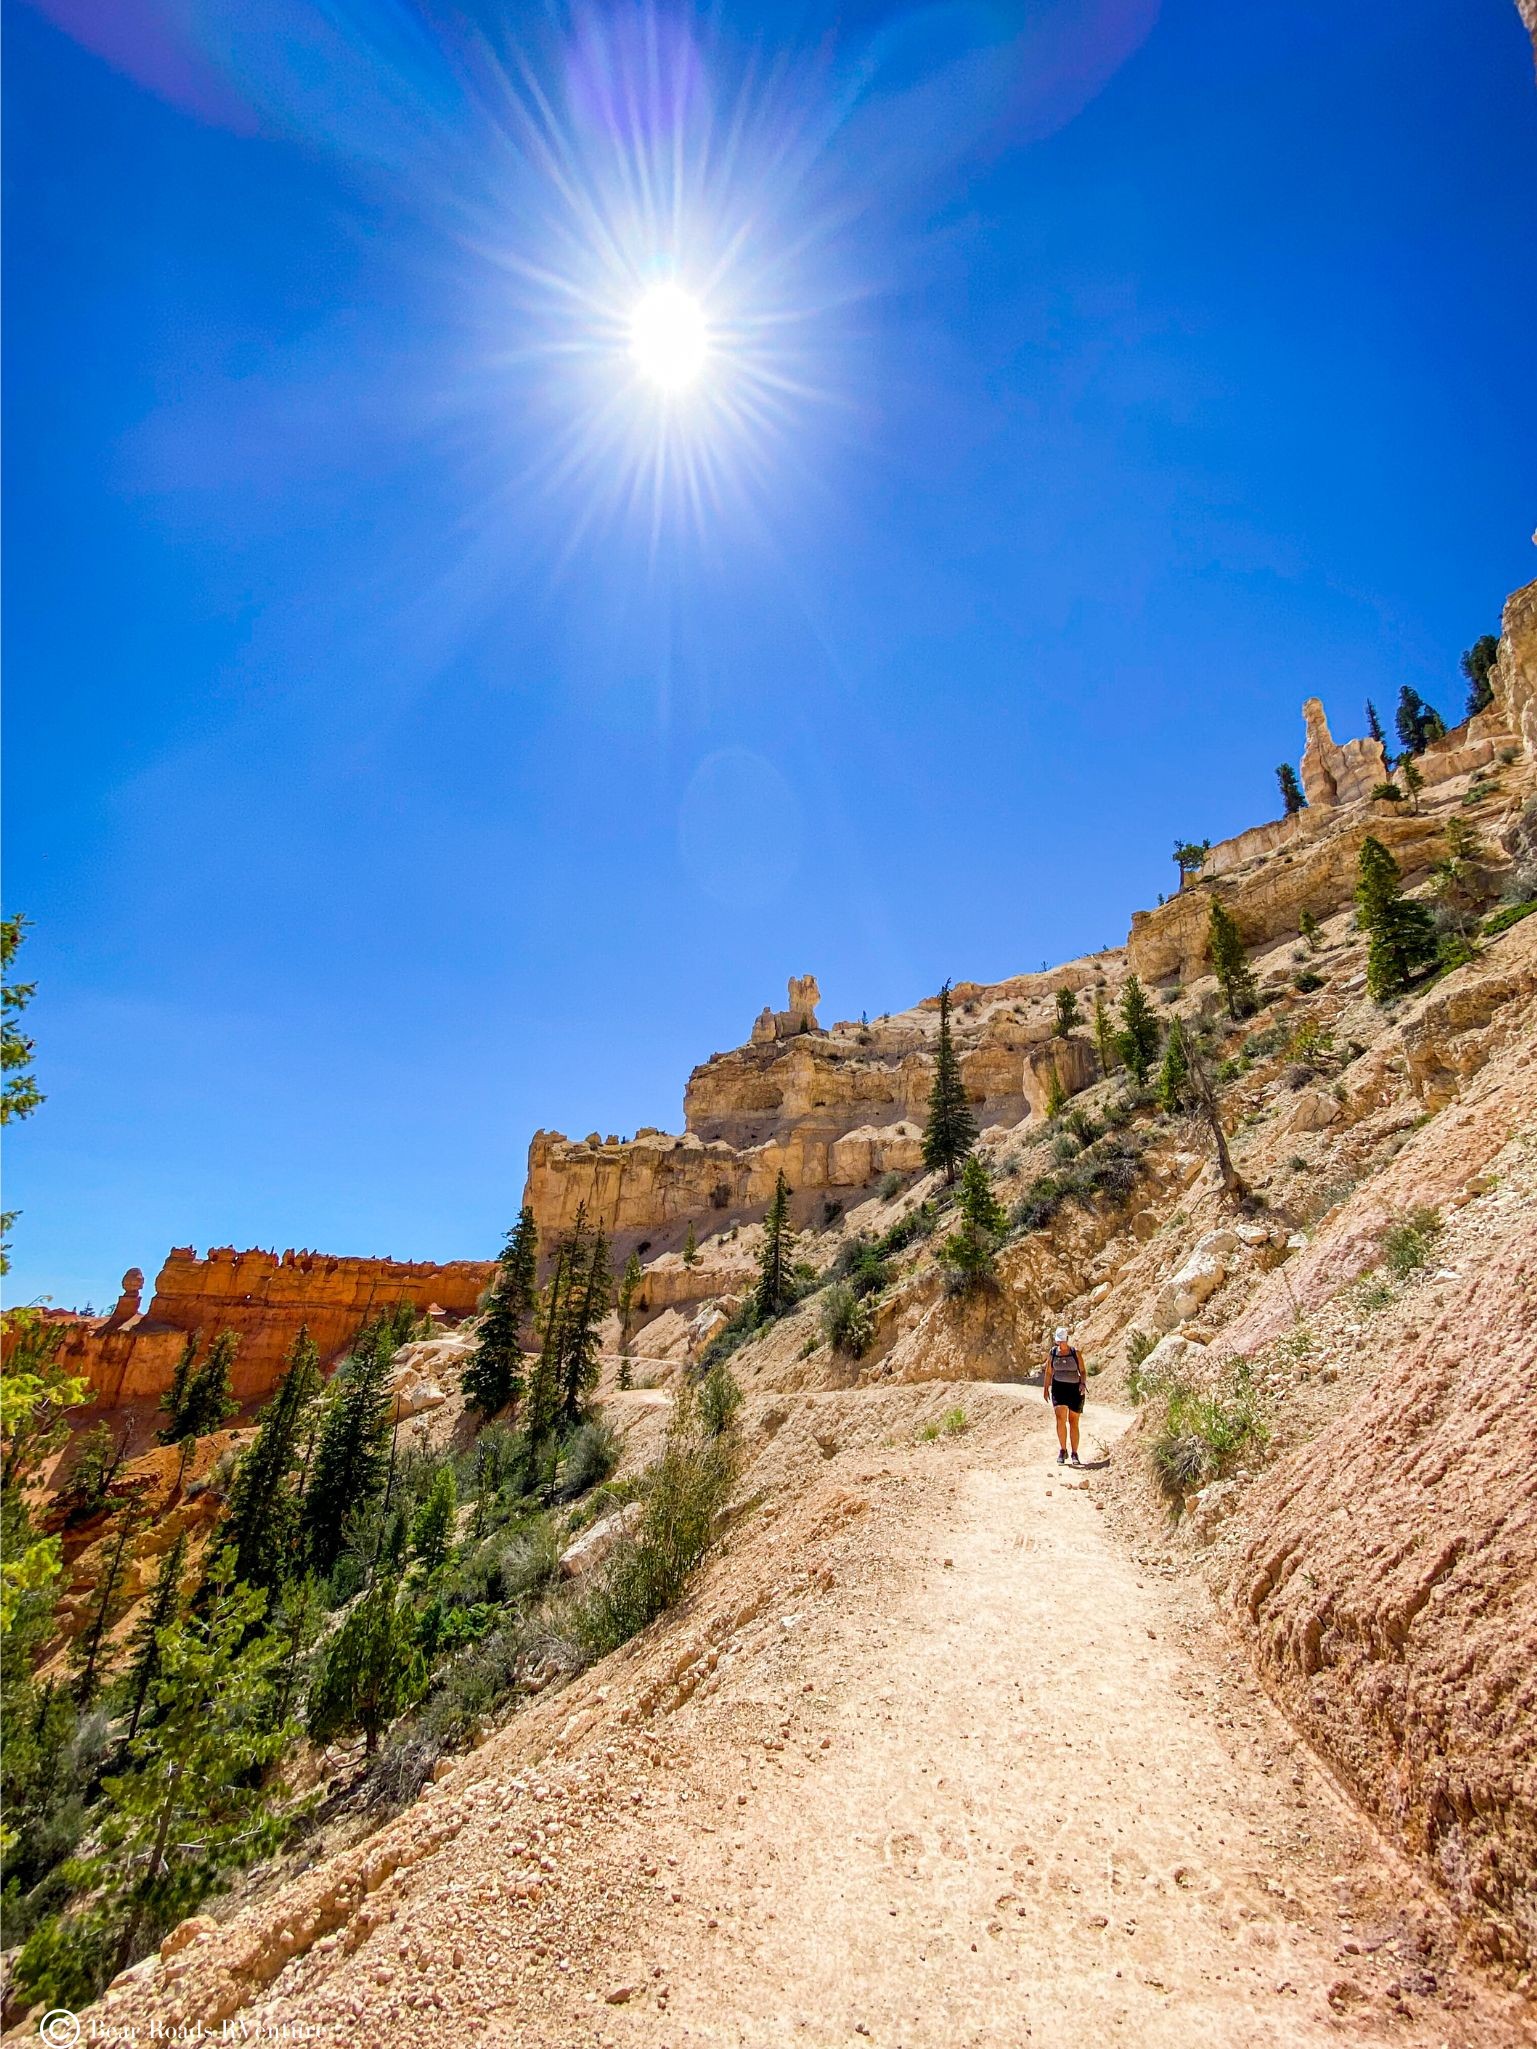 Bryce Canyon hiking with sun and heat